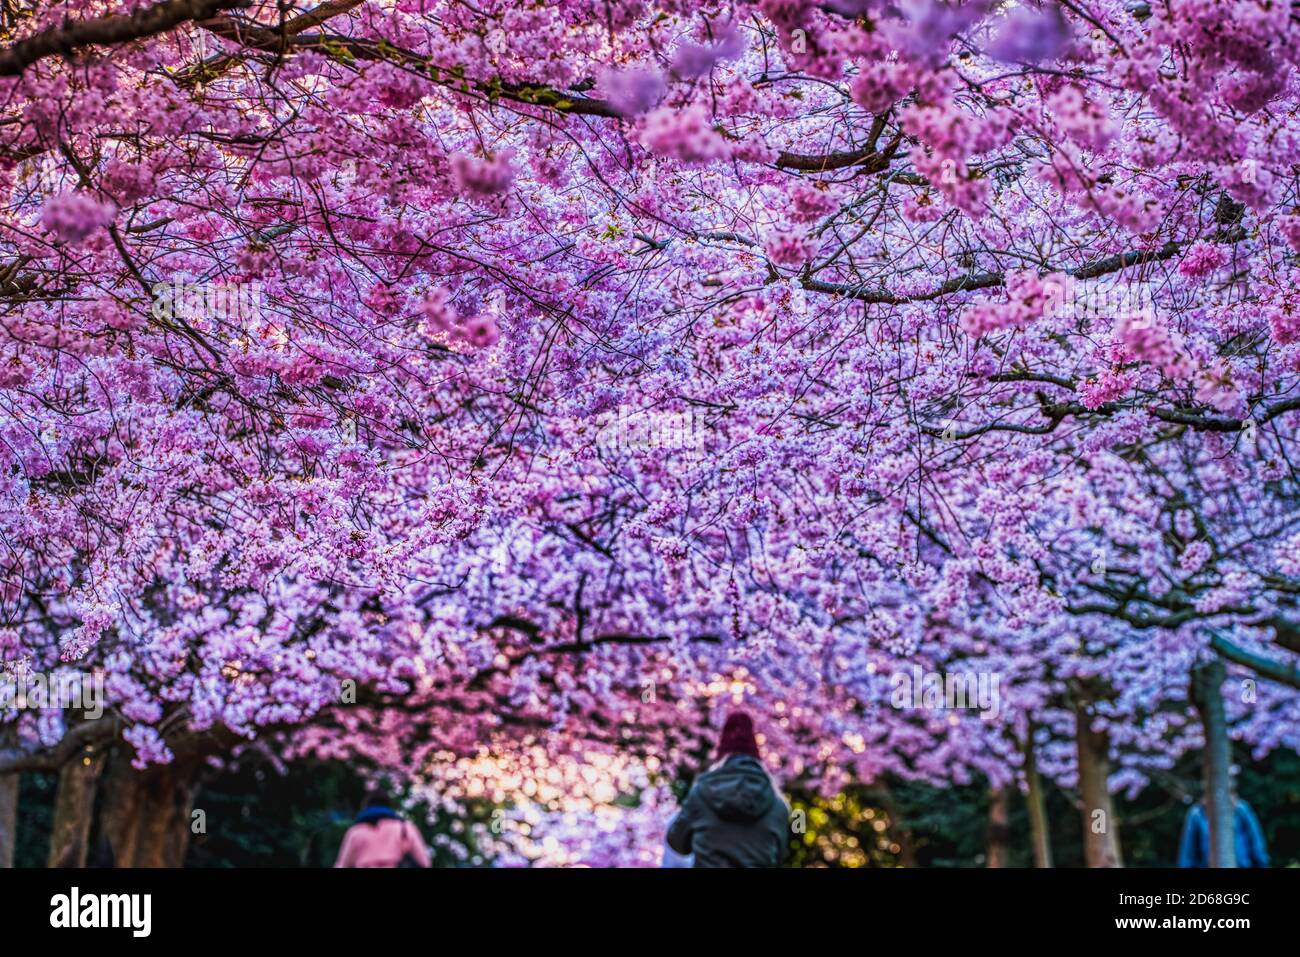 Sakura blooming with intense lush pink colour bear renewal and rebirth. Lavish pink cherry blossoms pattern with people admiring the pink cherry alley Stock Photo